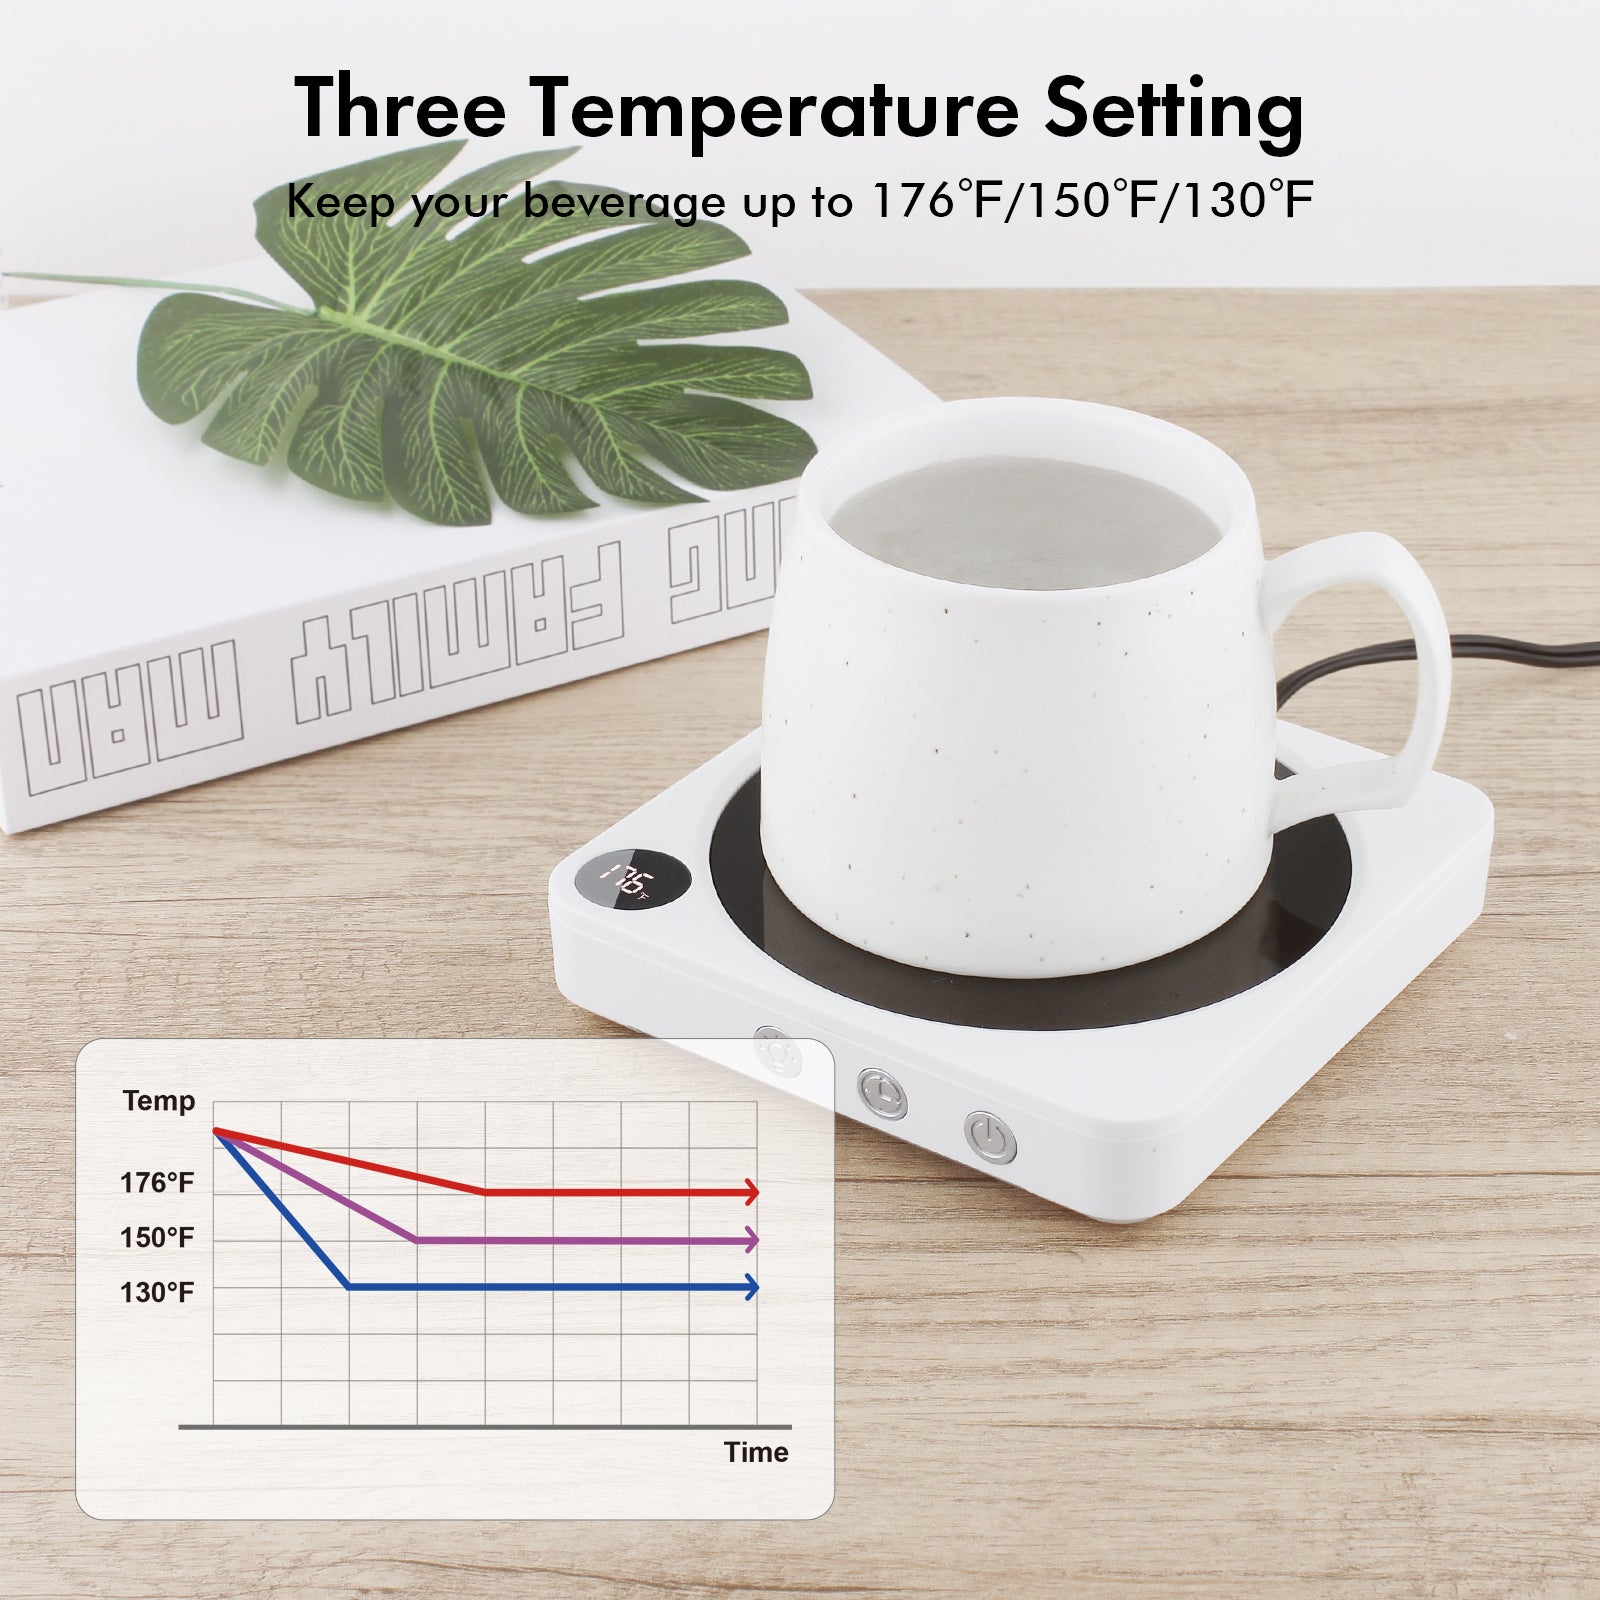 VOBAGA Coffee Mug Warmer with 5.2 inch Heating Plate, 3 Temperature Setting & Auto Shut Off (No Cup)